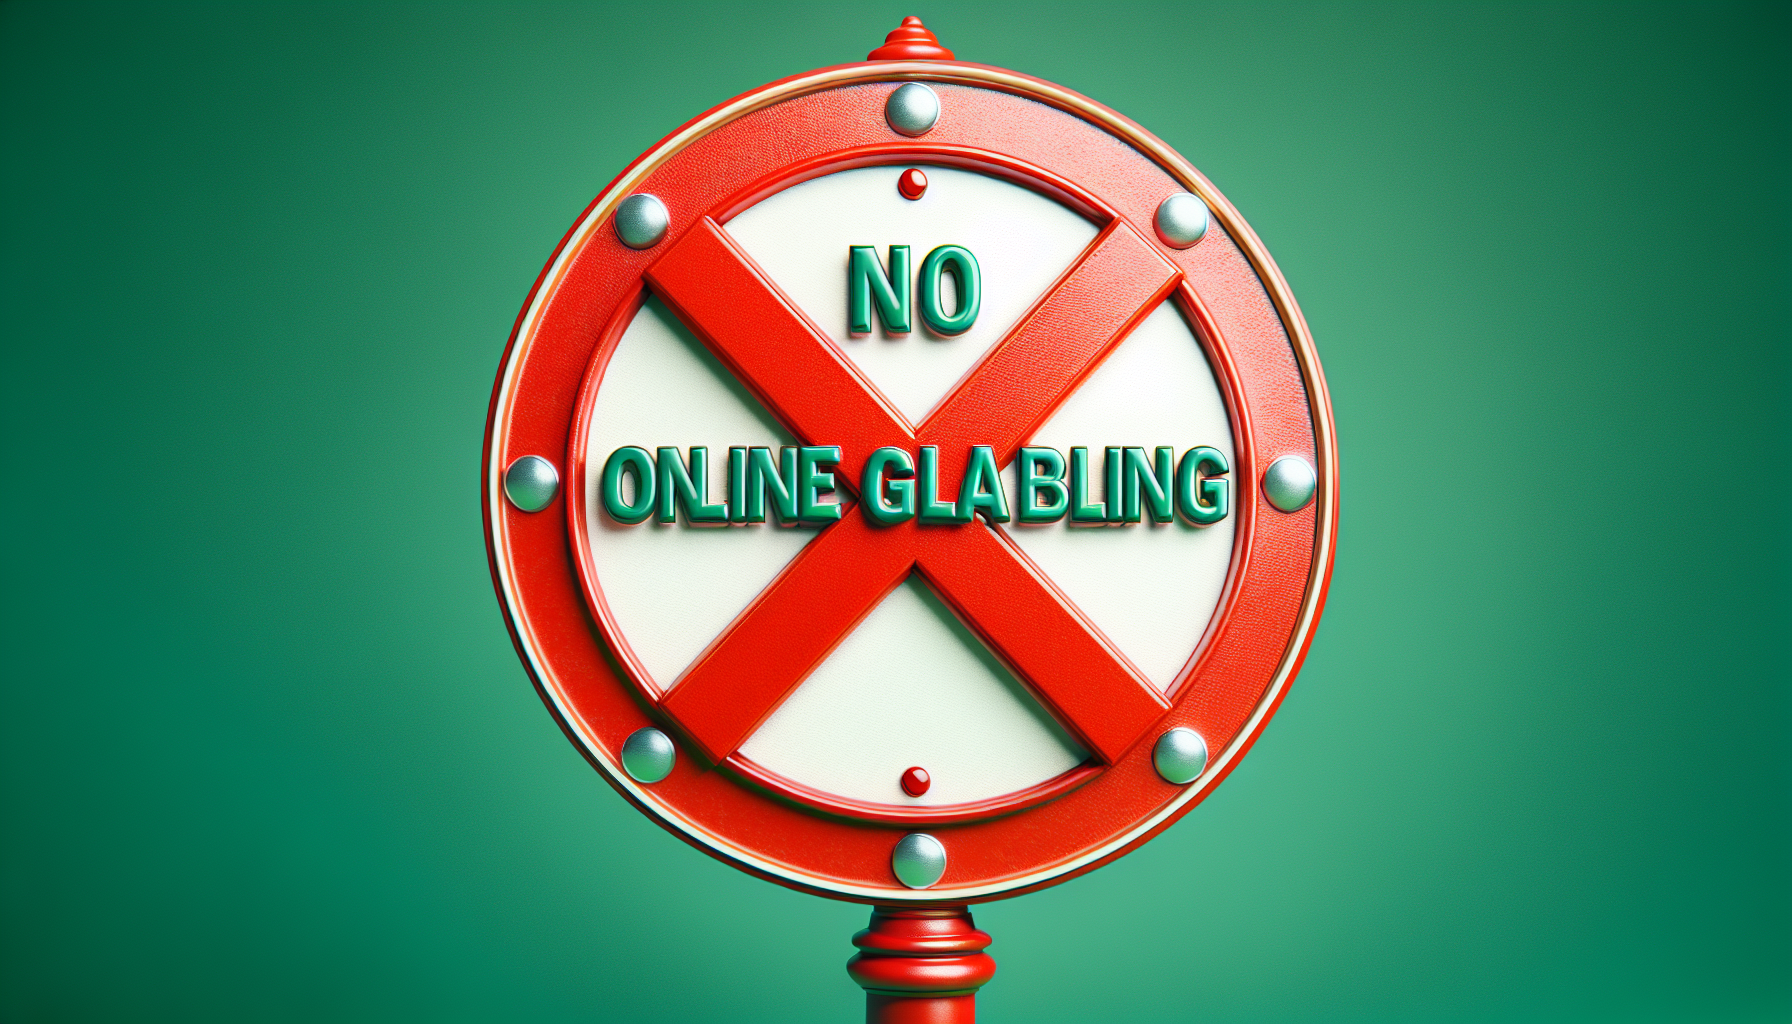 What States Is Online Gambling Illegal?